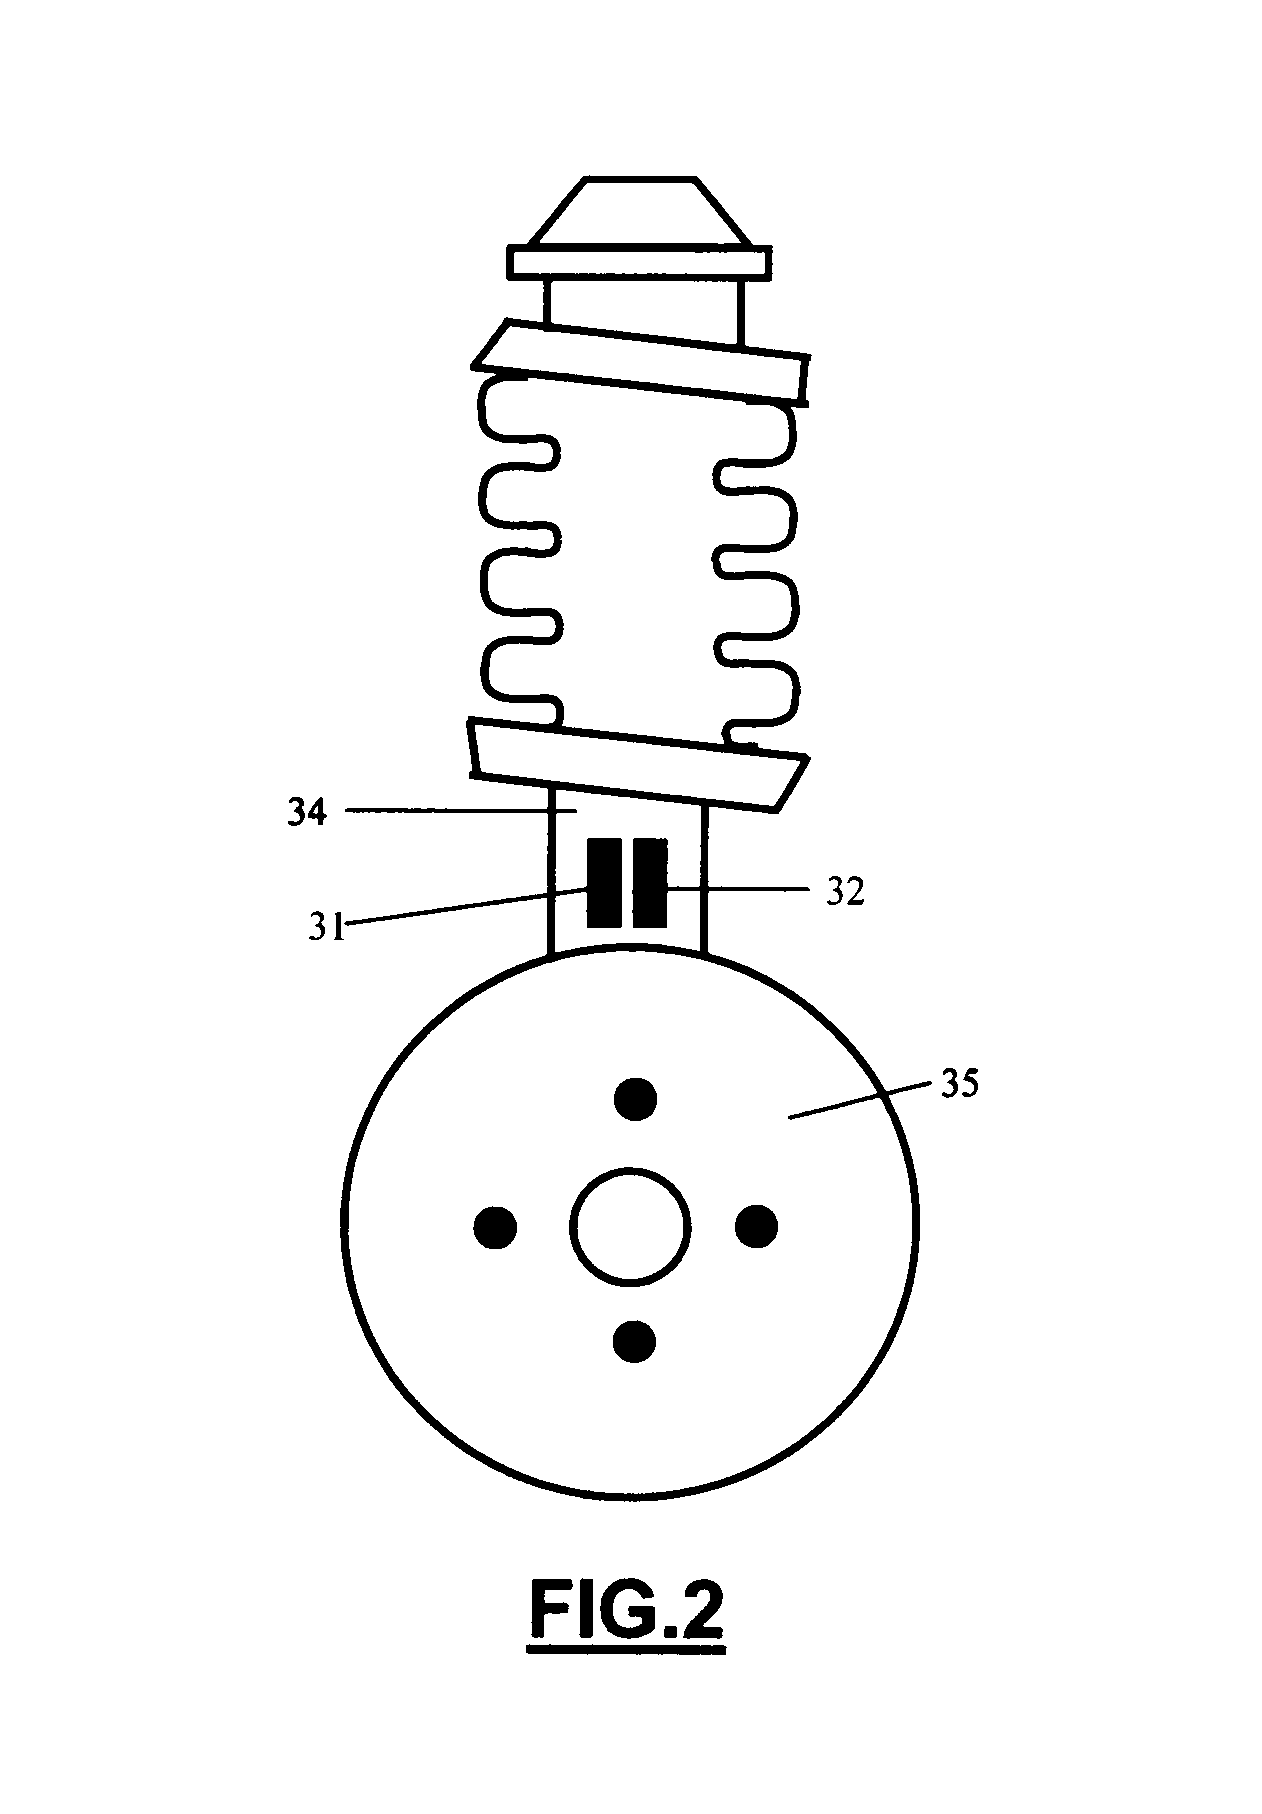 Tire parameter monitoring system with sensor location using magnetic fields